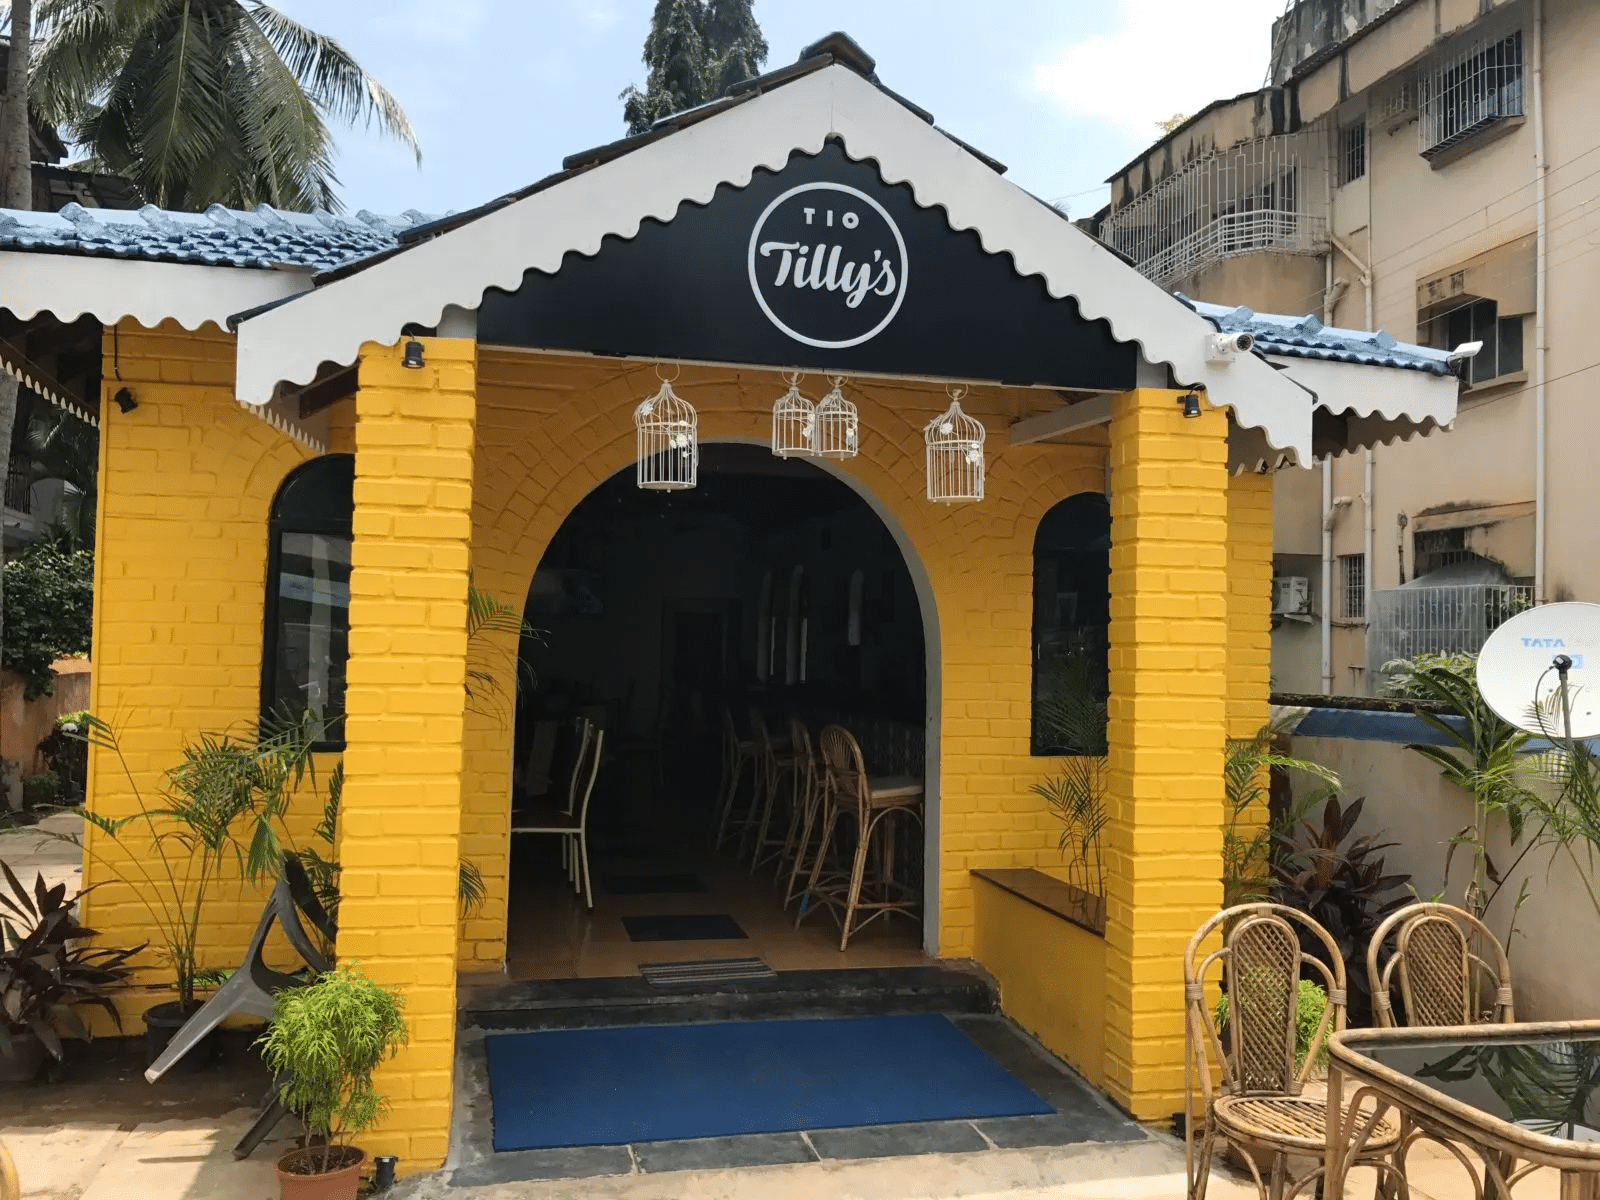 Tio Tilly's Bar and Kitchen